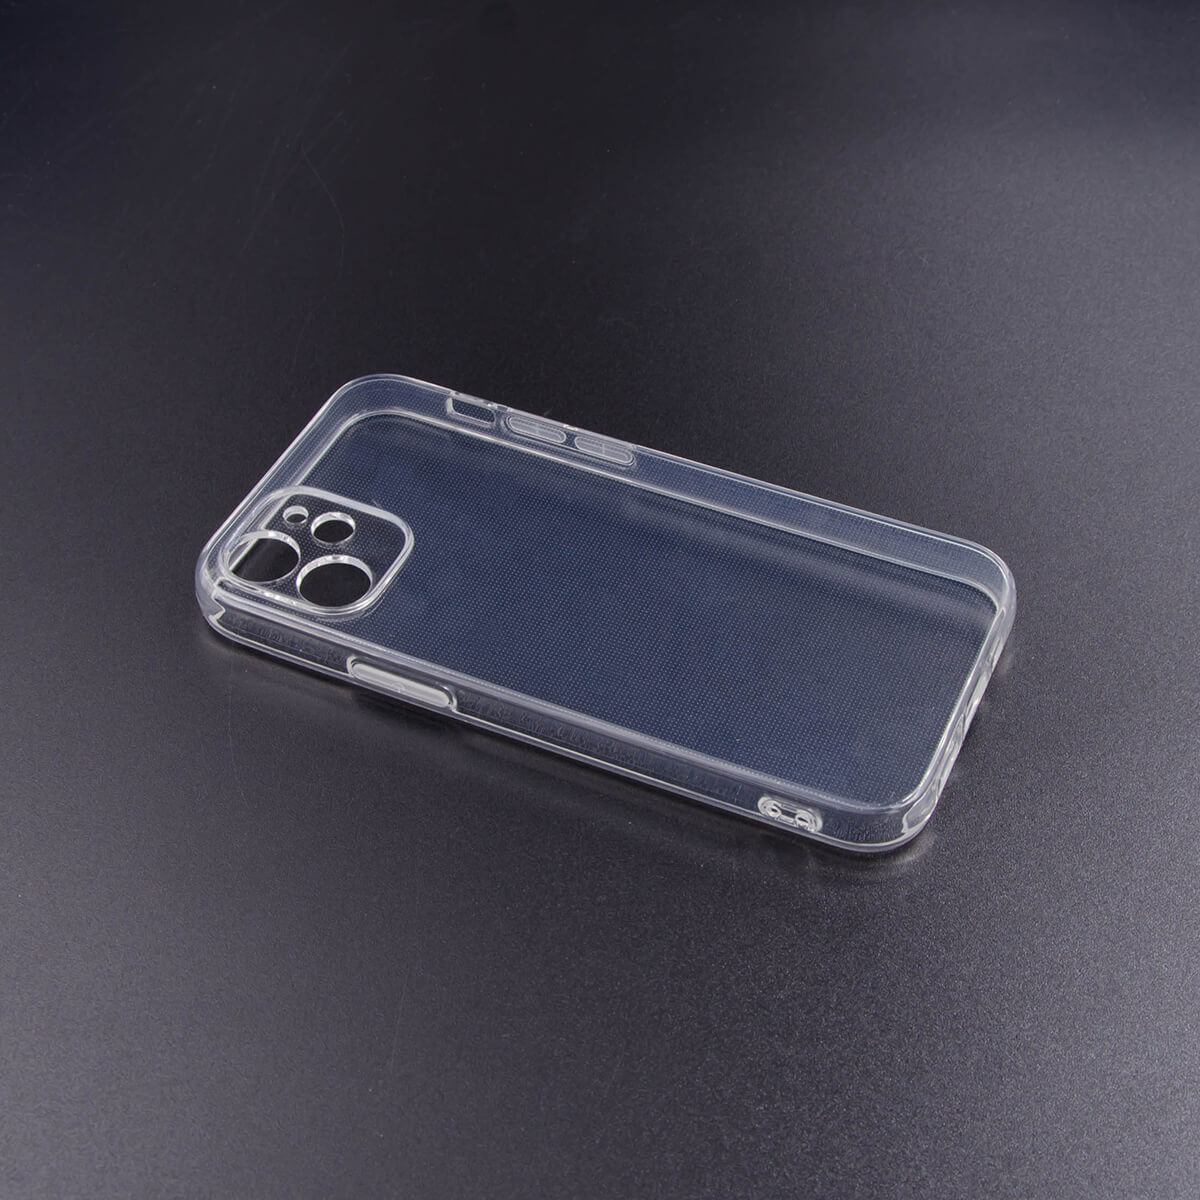 Tpu clear solid for iphone 12 mini (5.4")